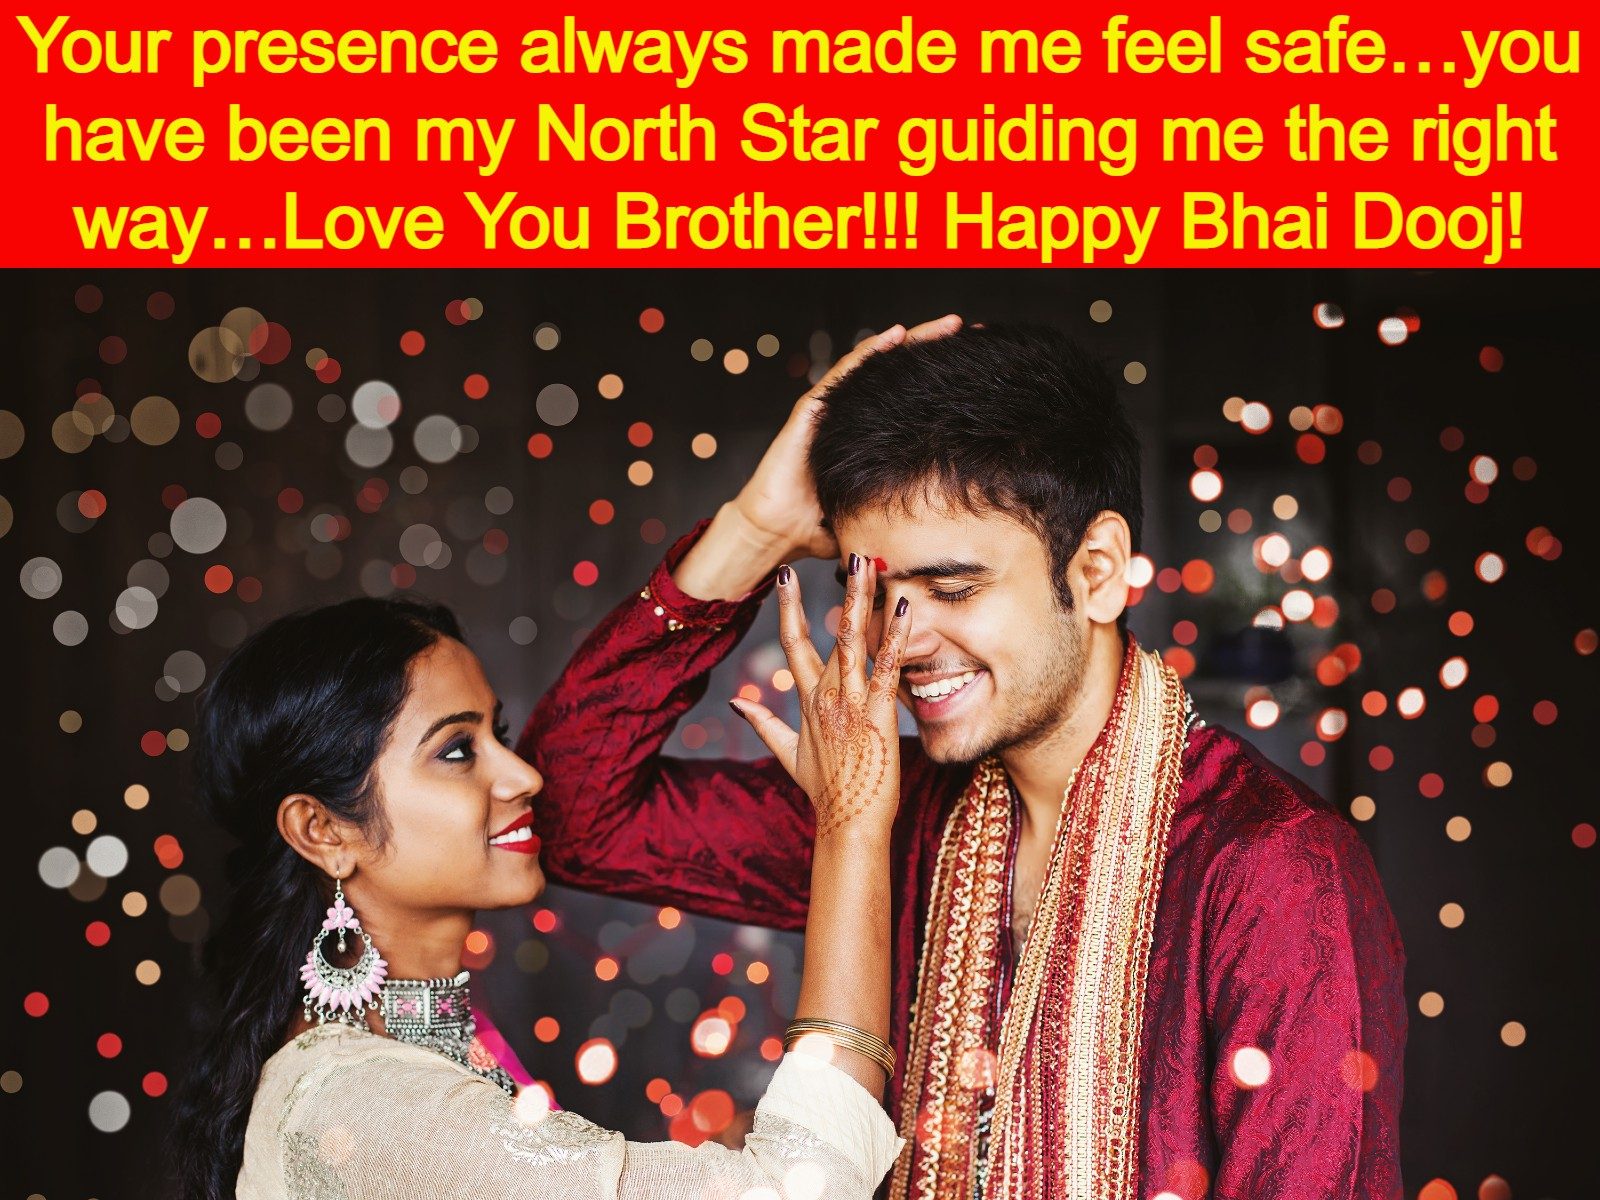 Happy Bhai Dooj 2022 Wishes, Images, Status, Quotes, Messages, Facebook and WhatsApp Greetings to Celebrate Brother-Sister Bond photo